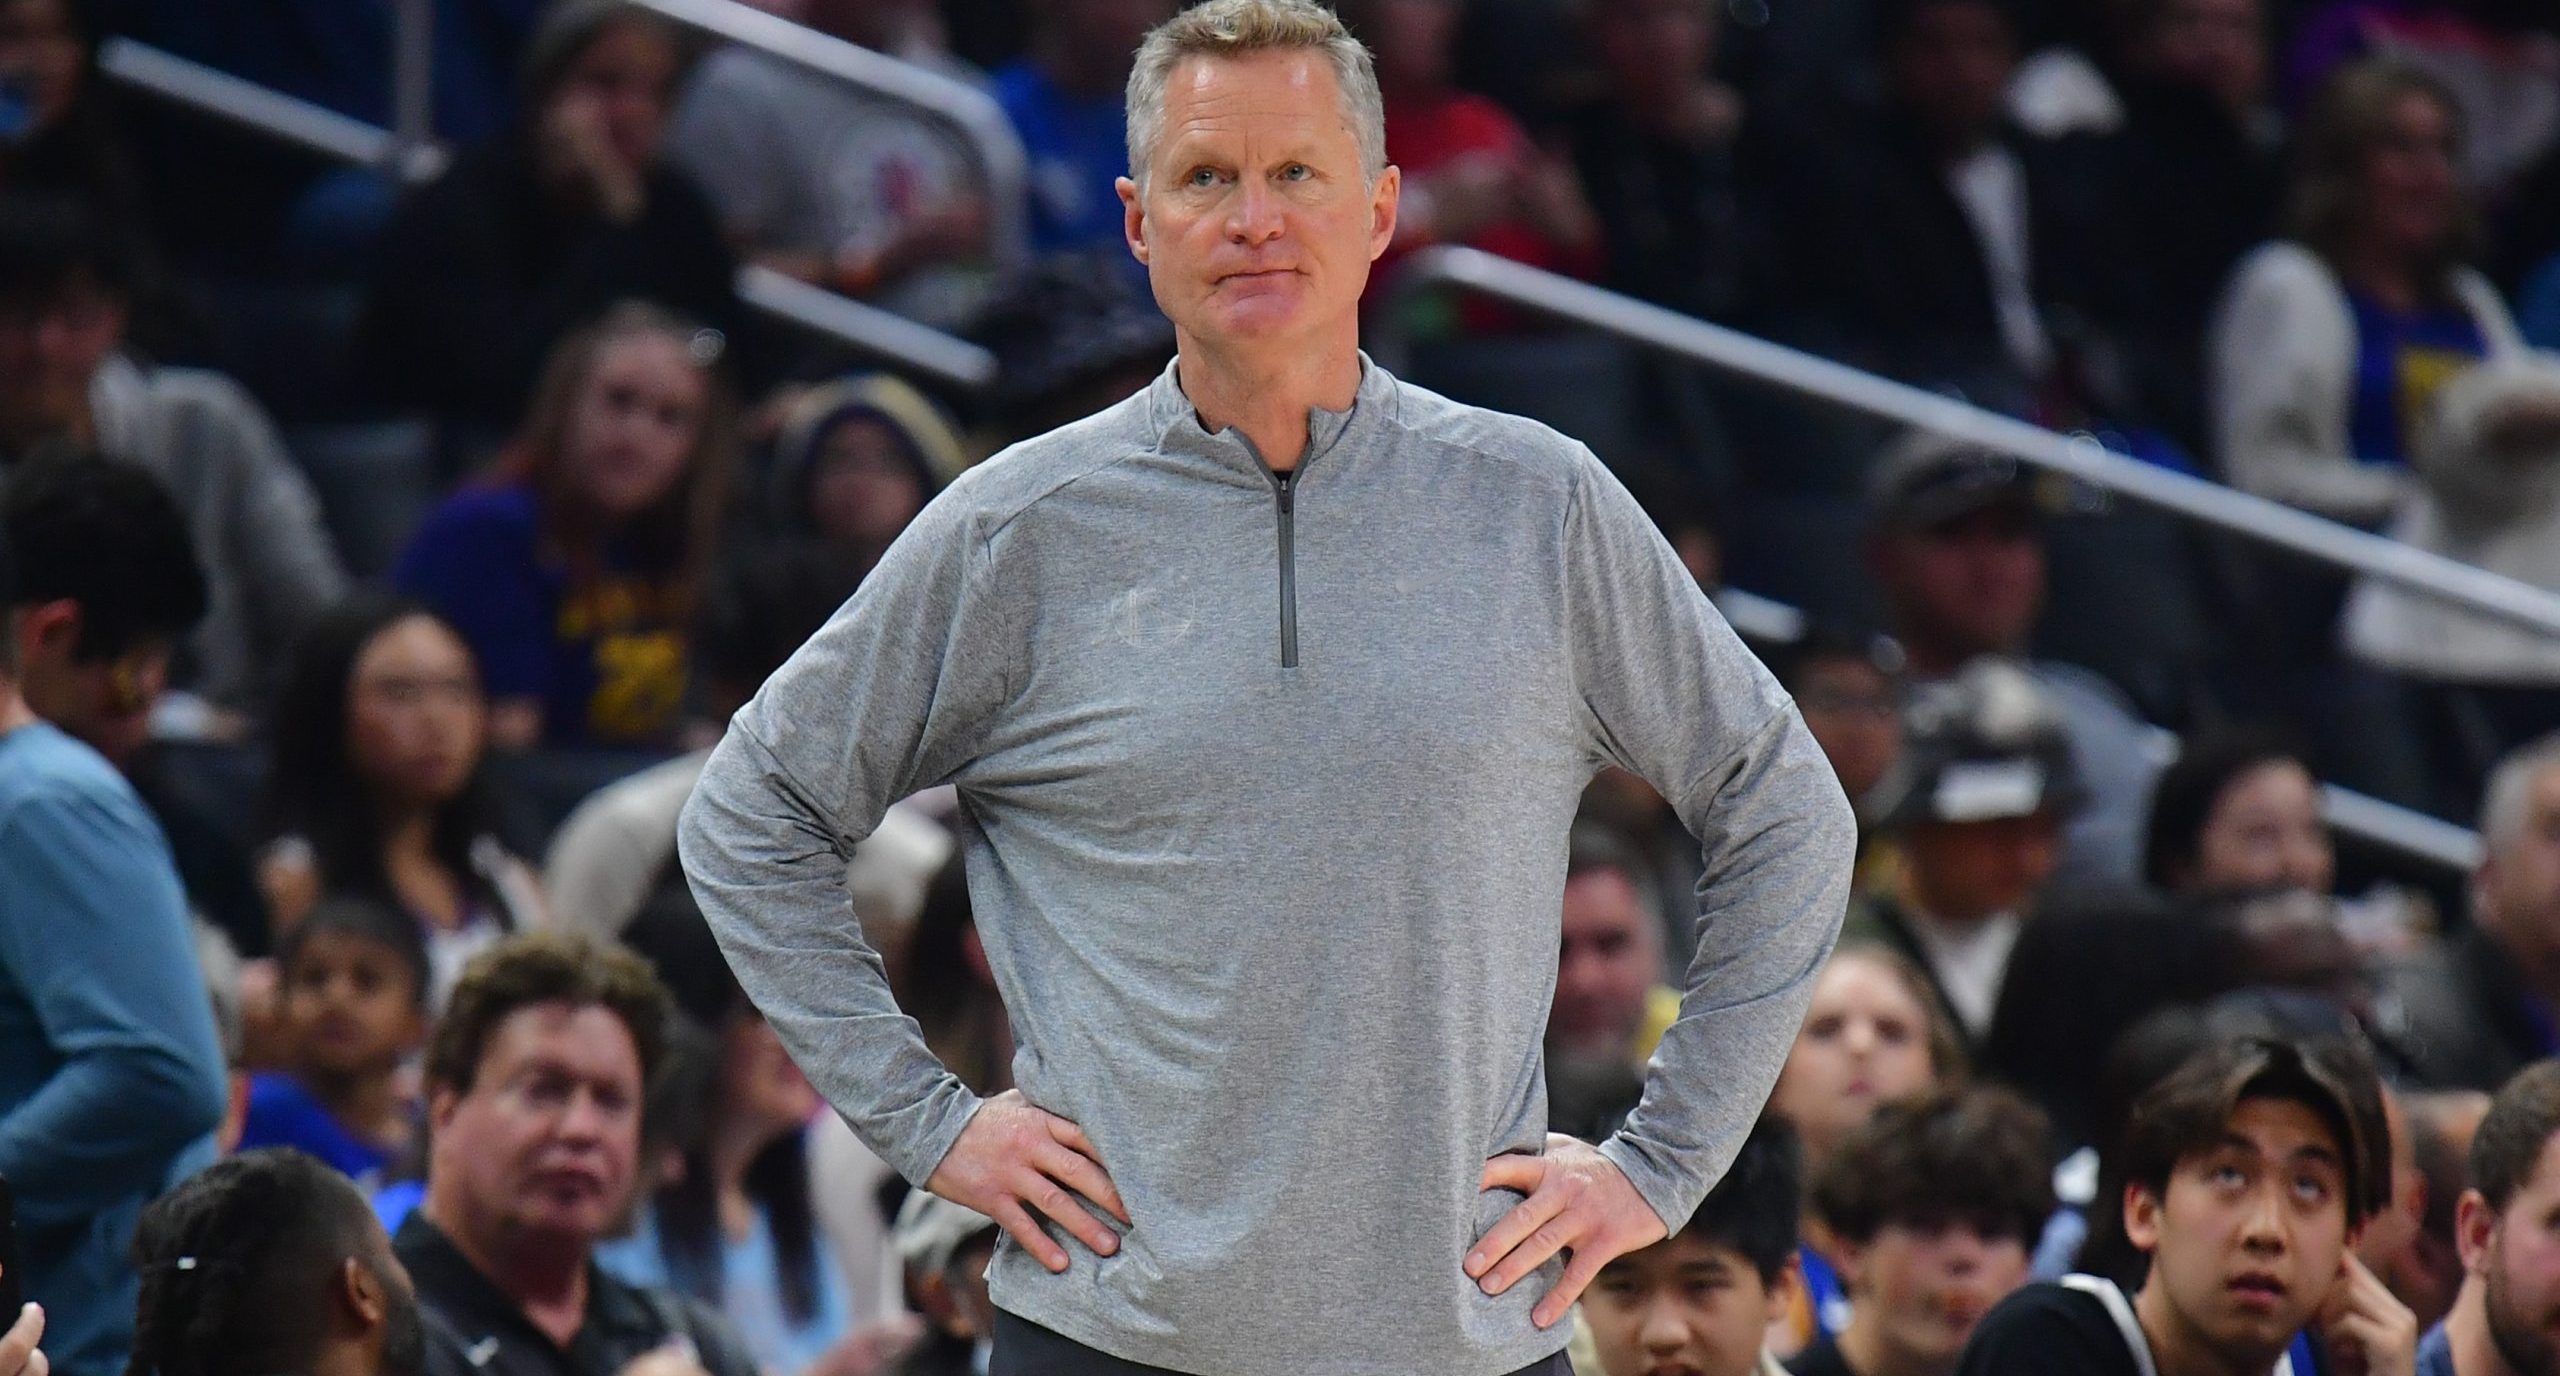 Steve Kerr reveals he’s “Hurt” after Massive loss to Clippers